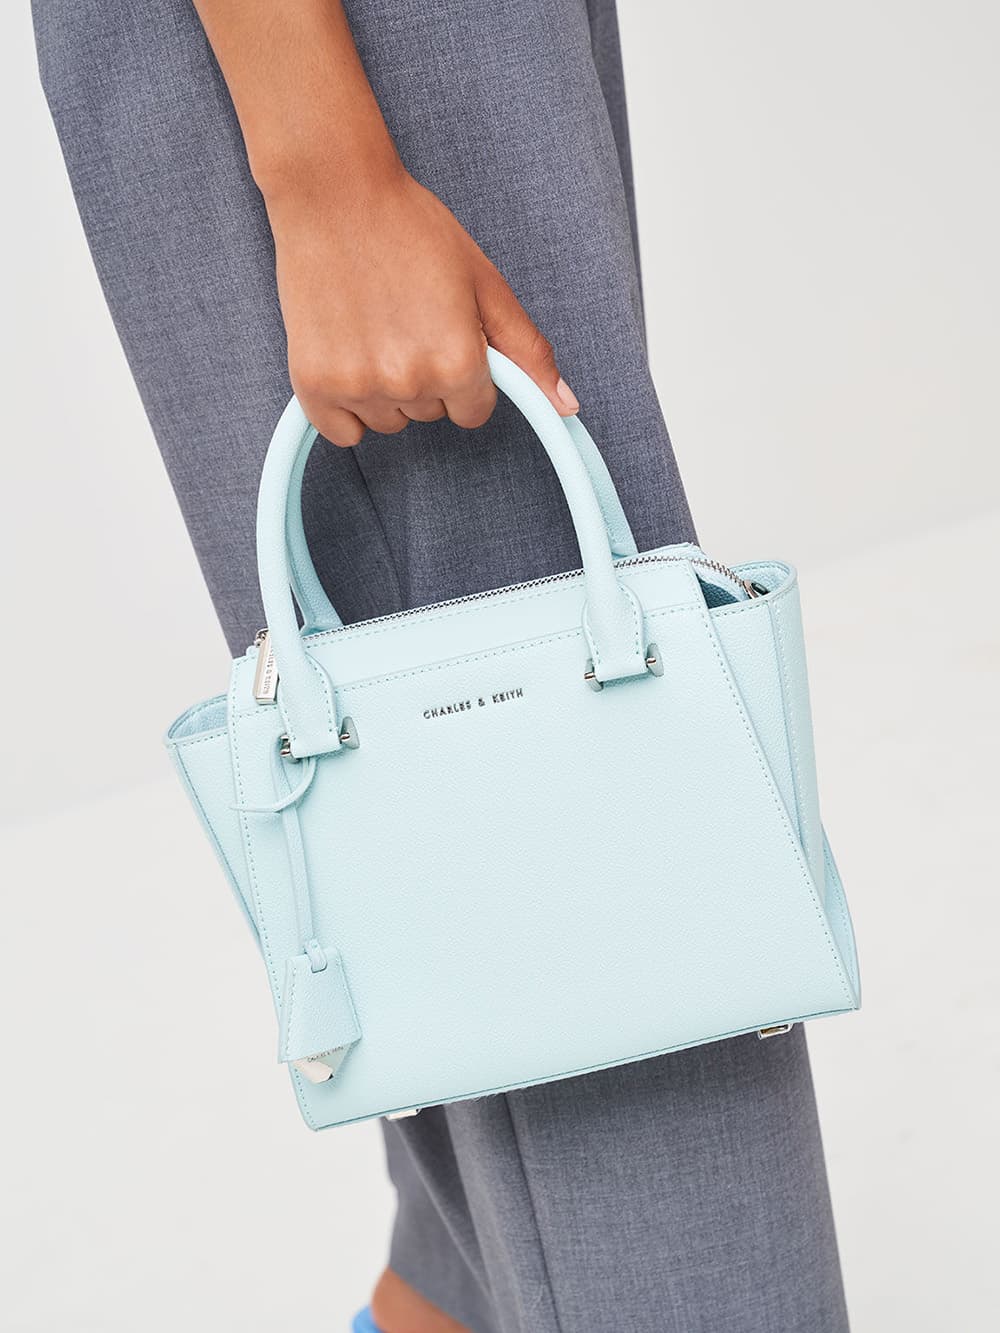 Women's light blue double handle trapeze tote - CHARLES & KEITH